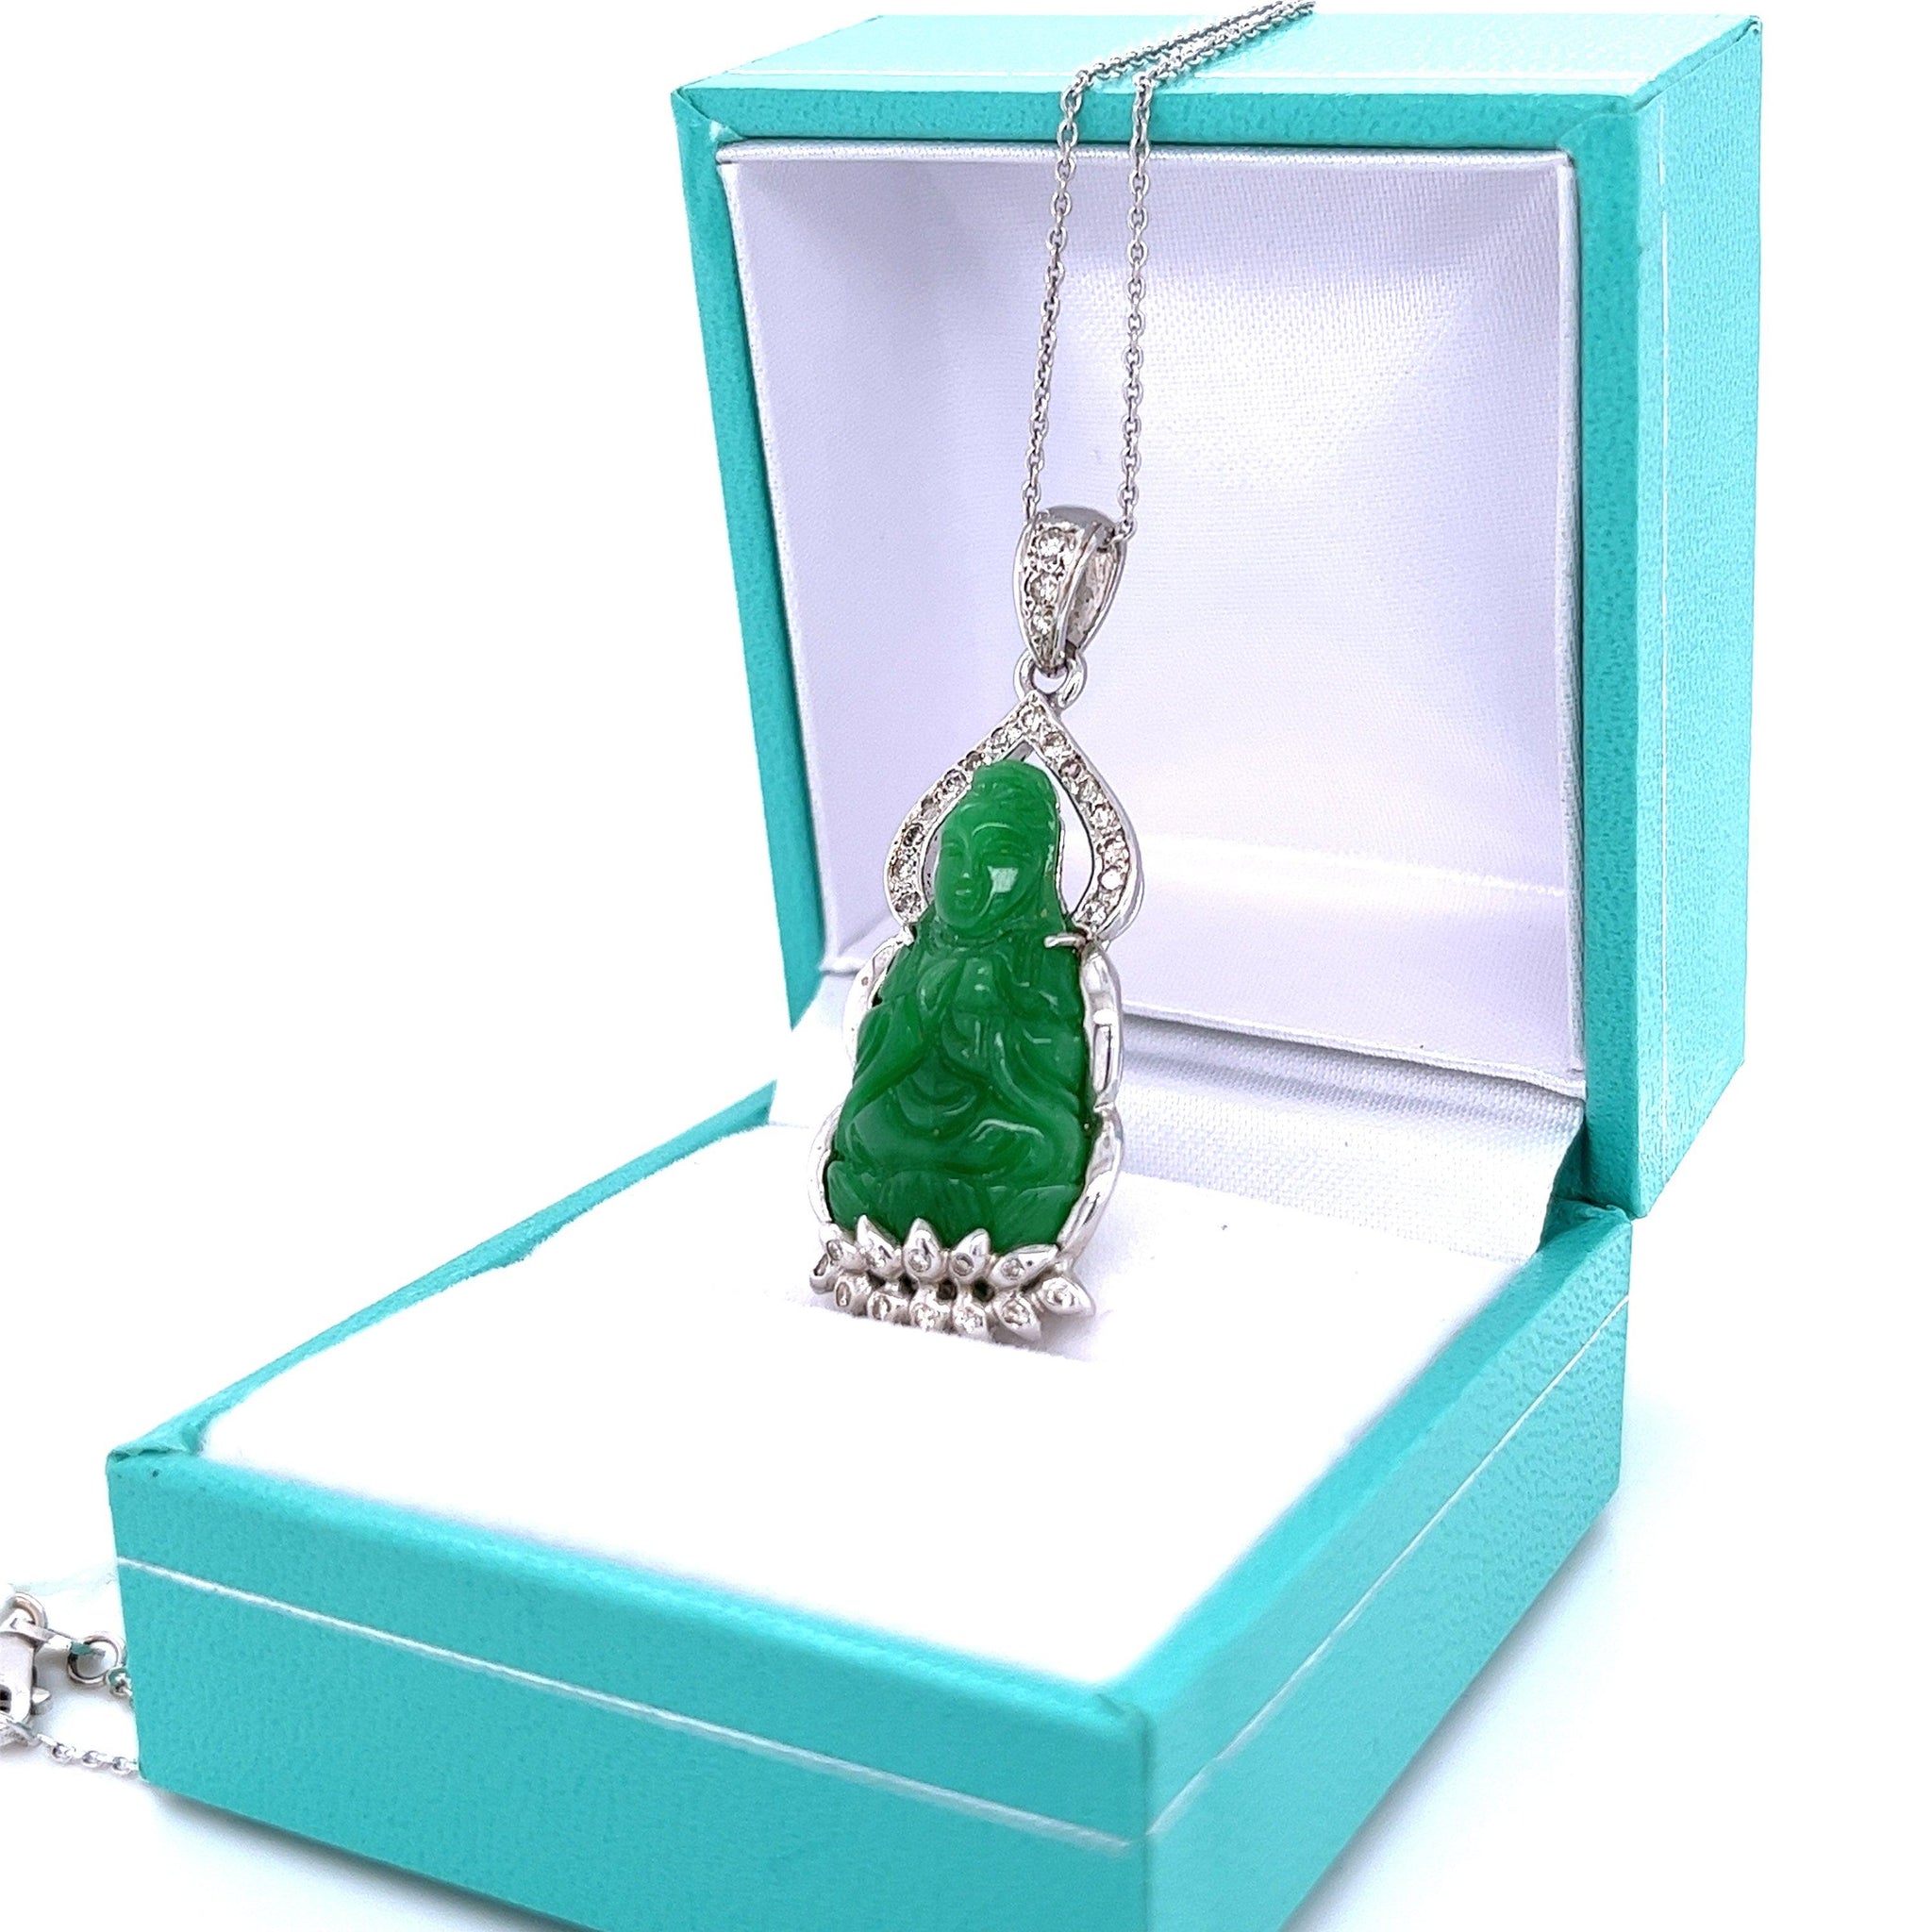 14K White Gold Carved Jade Buddha and Diamond Pendant Necklace Necklace